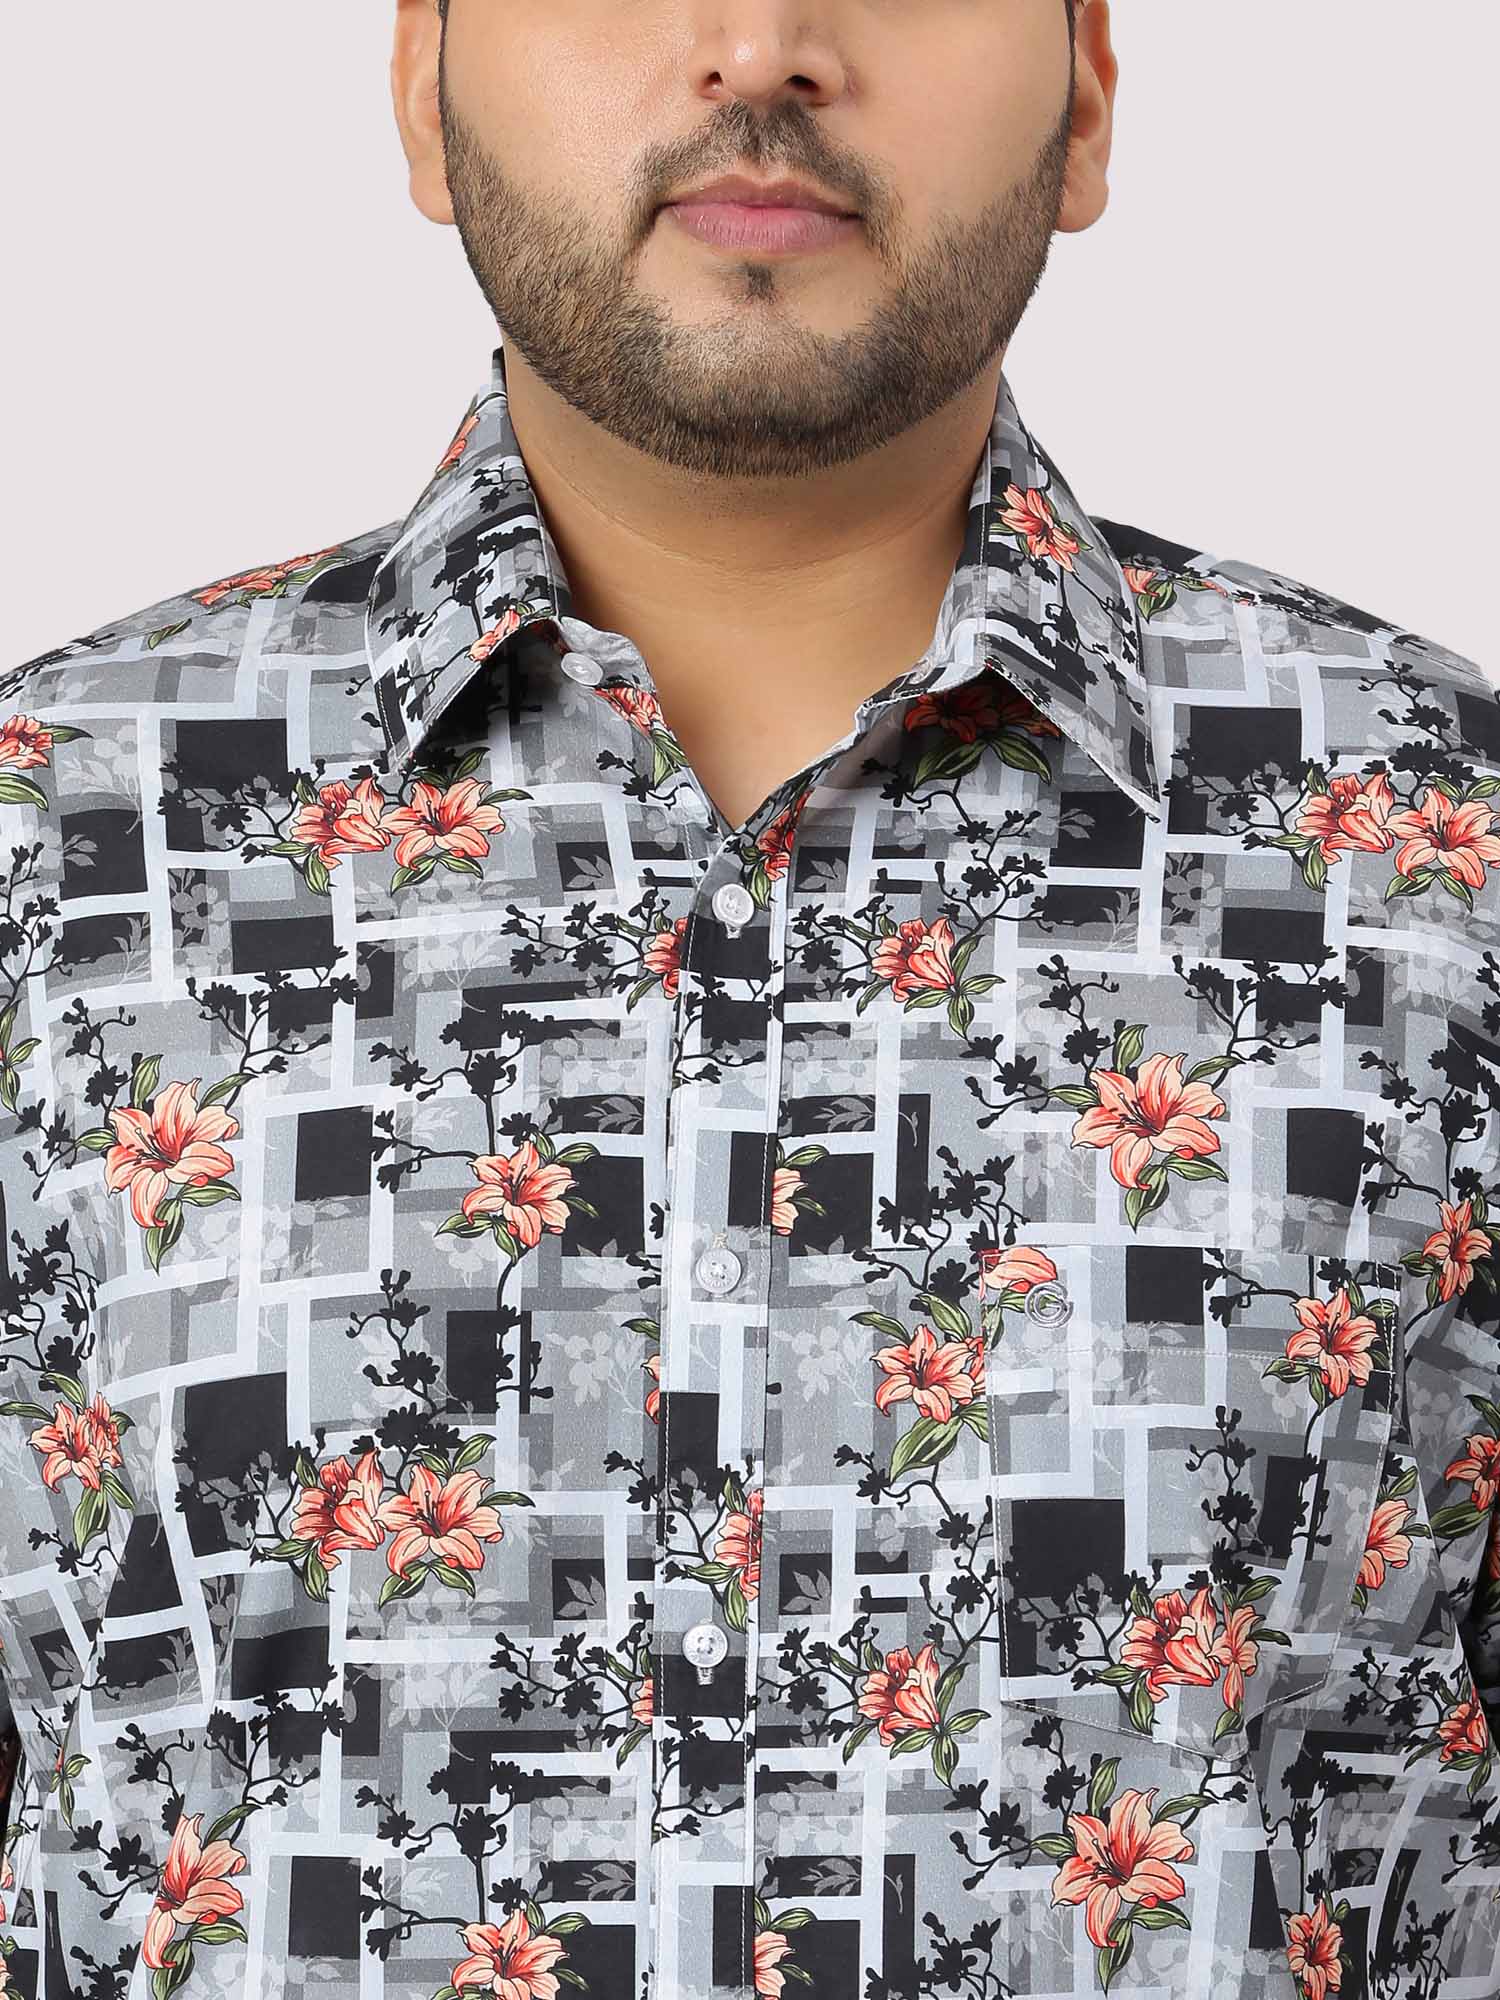 Abstract Flower Printed Half Sleeve Shirt Men's Plus Size